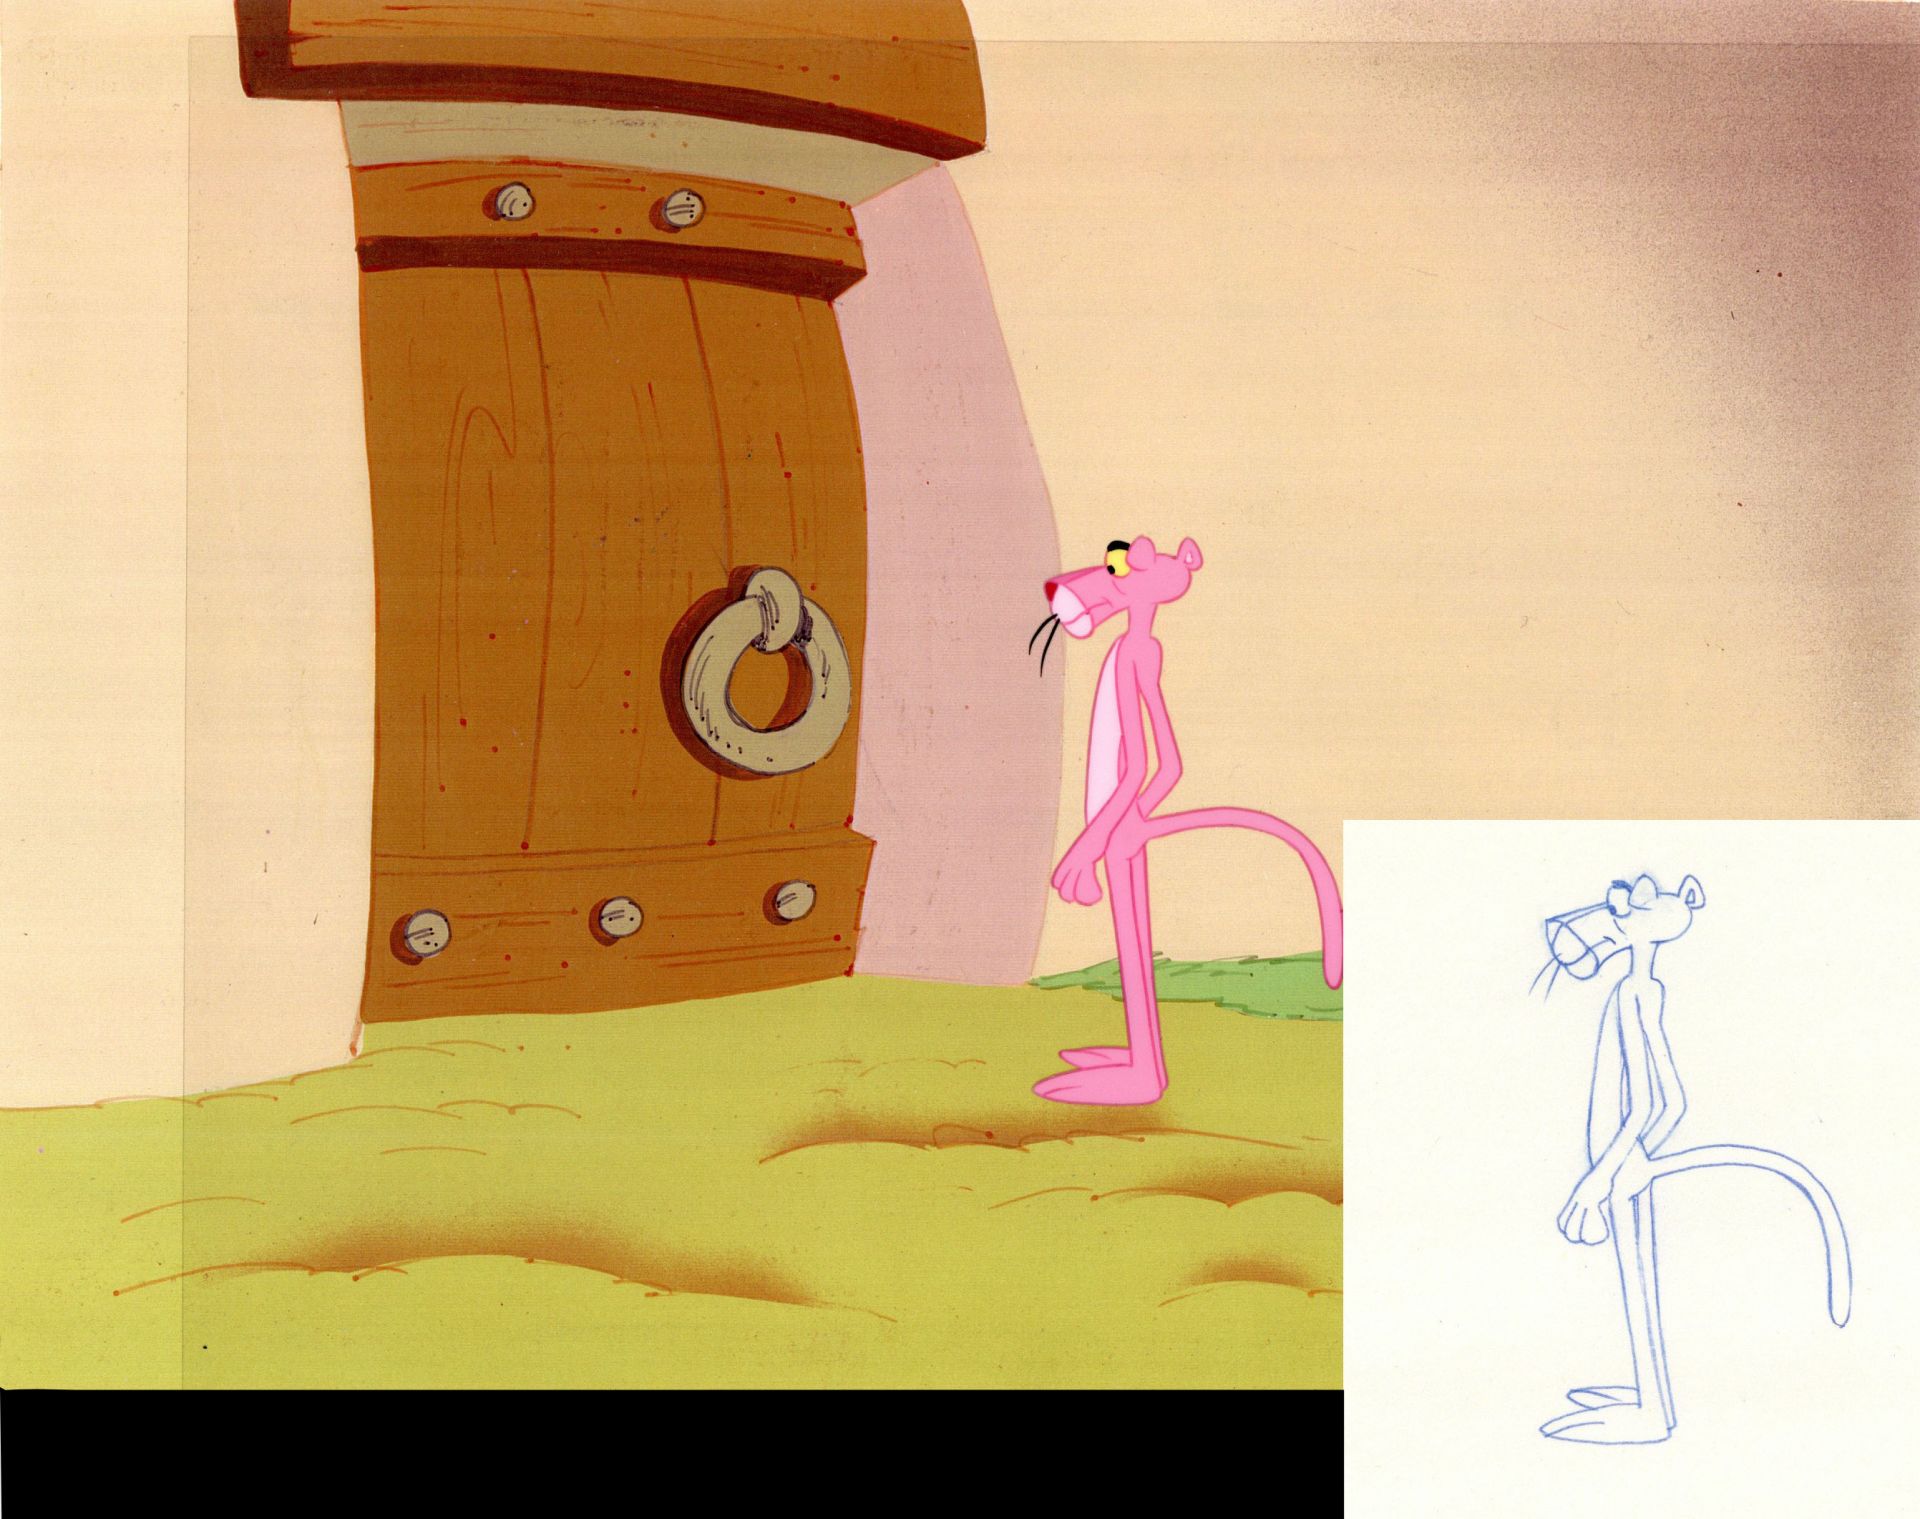 Buy The Pink Panther Show 1970 2 Original Animation Cell & Pencil Drawing  the Pink Panther With Certificate of Authenticity Online in India - Etsy